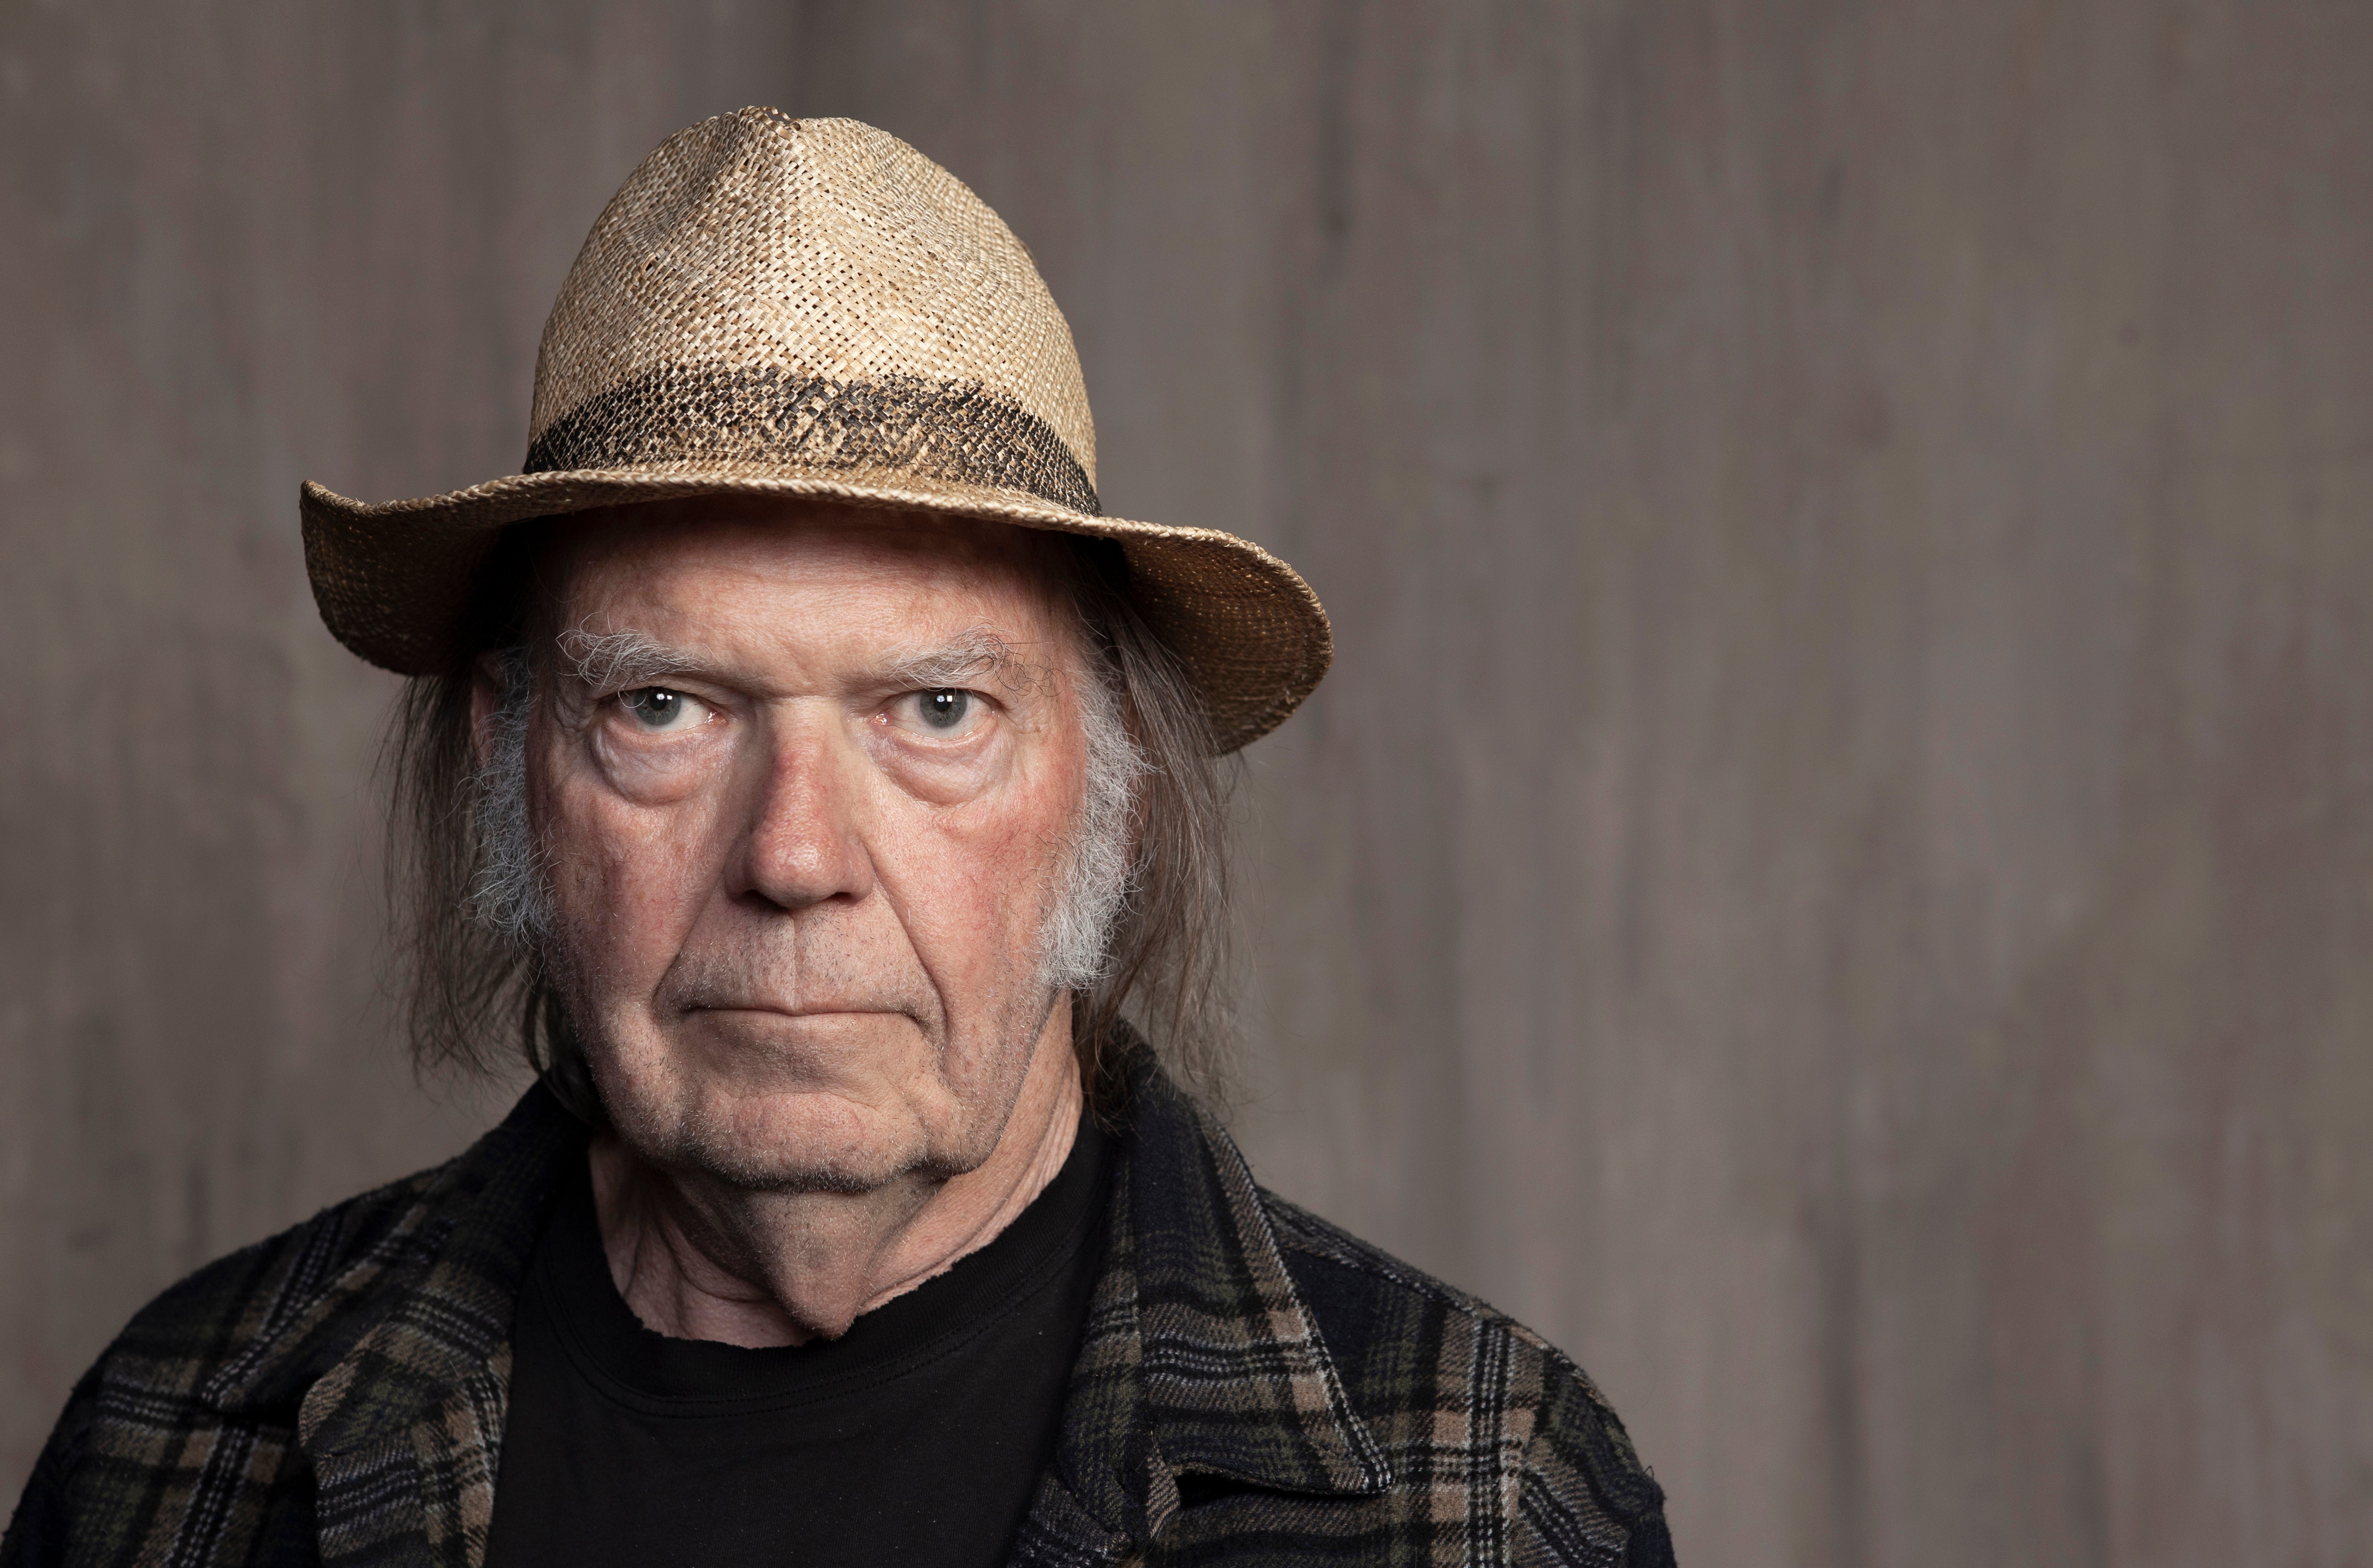 Neil Young joined Crosby, Stills & Nash in 1969 but the group hasn’t performed together since 2013